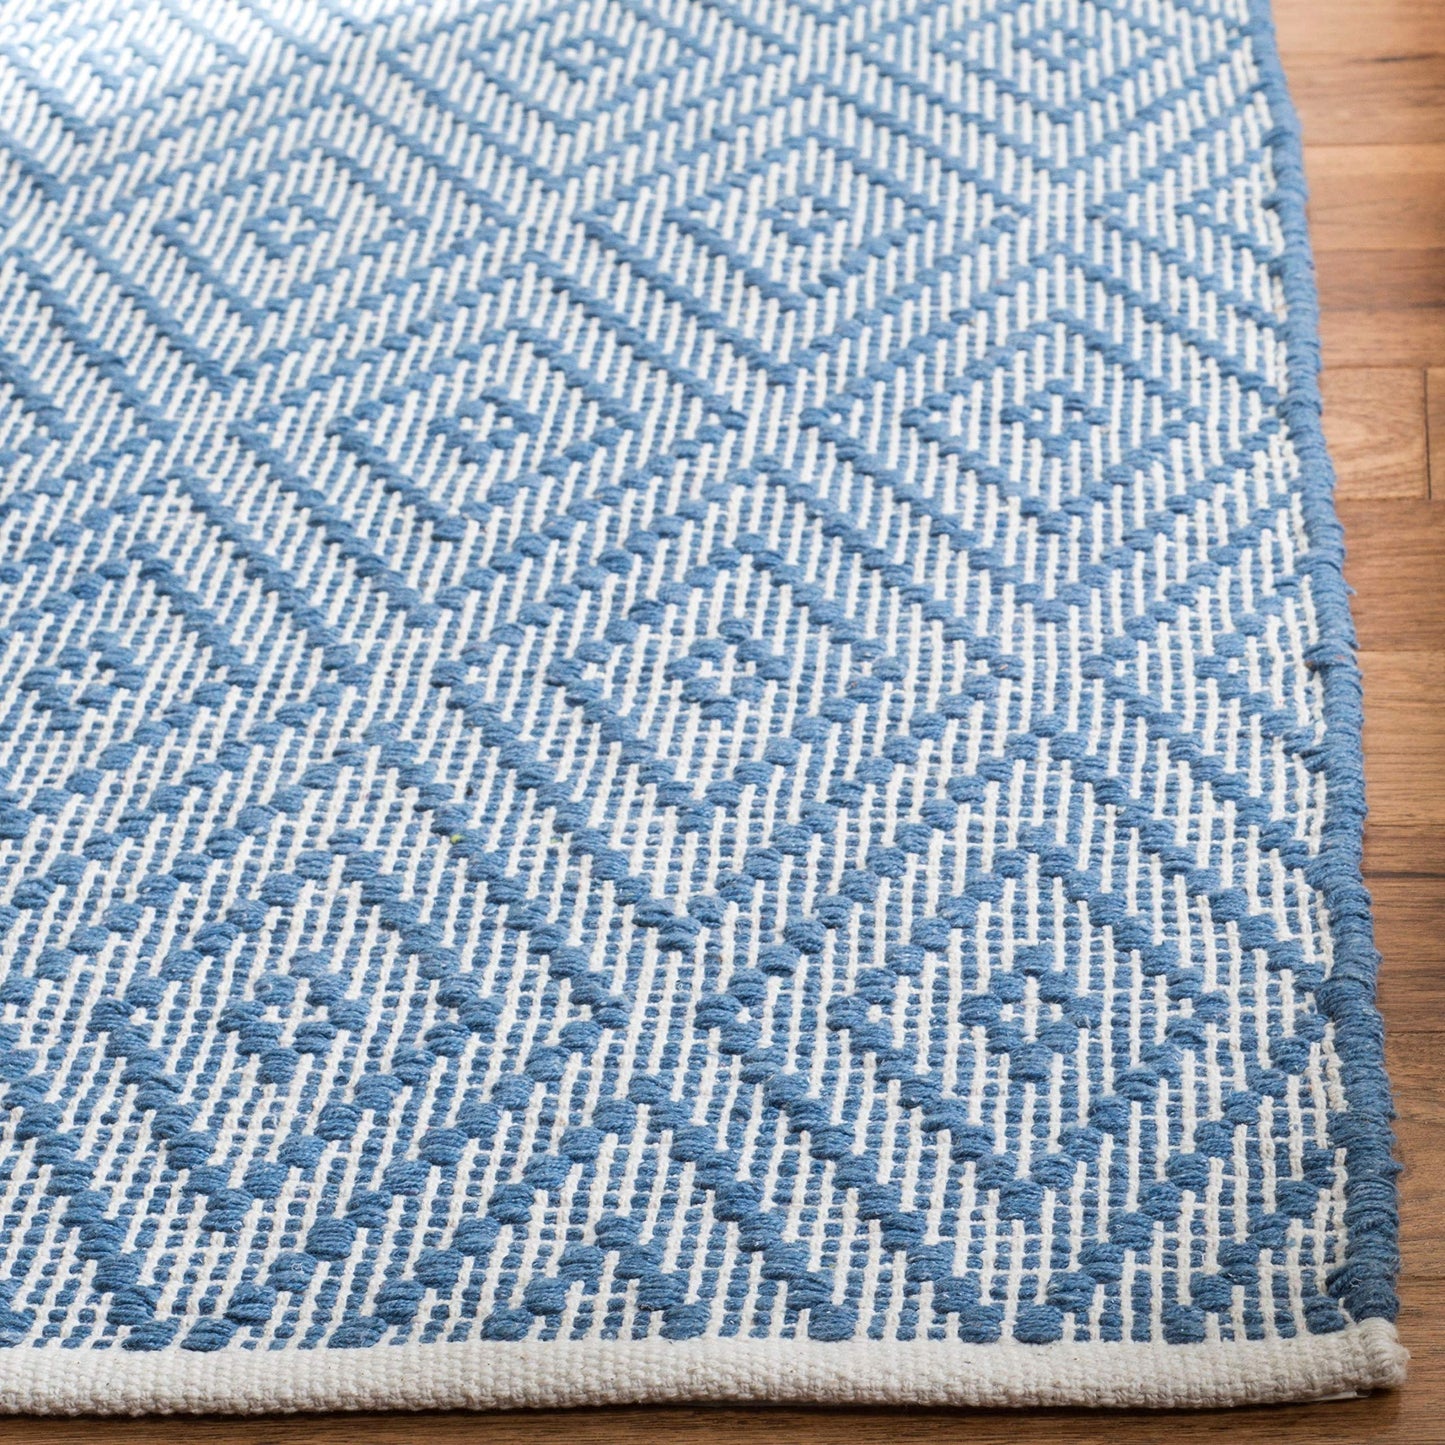 SAFAVIEH Montauk Collection Accent Rug - 2\'3\" x 3\'9\", Blue &amp; Ivory, Handmade Trellis Cotton, Ideal for High Traffic Areas in Entryway, Living Room, Bedroom (MTK811B)